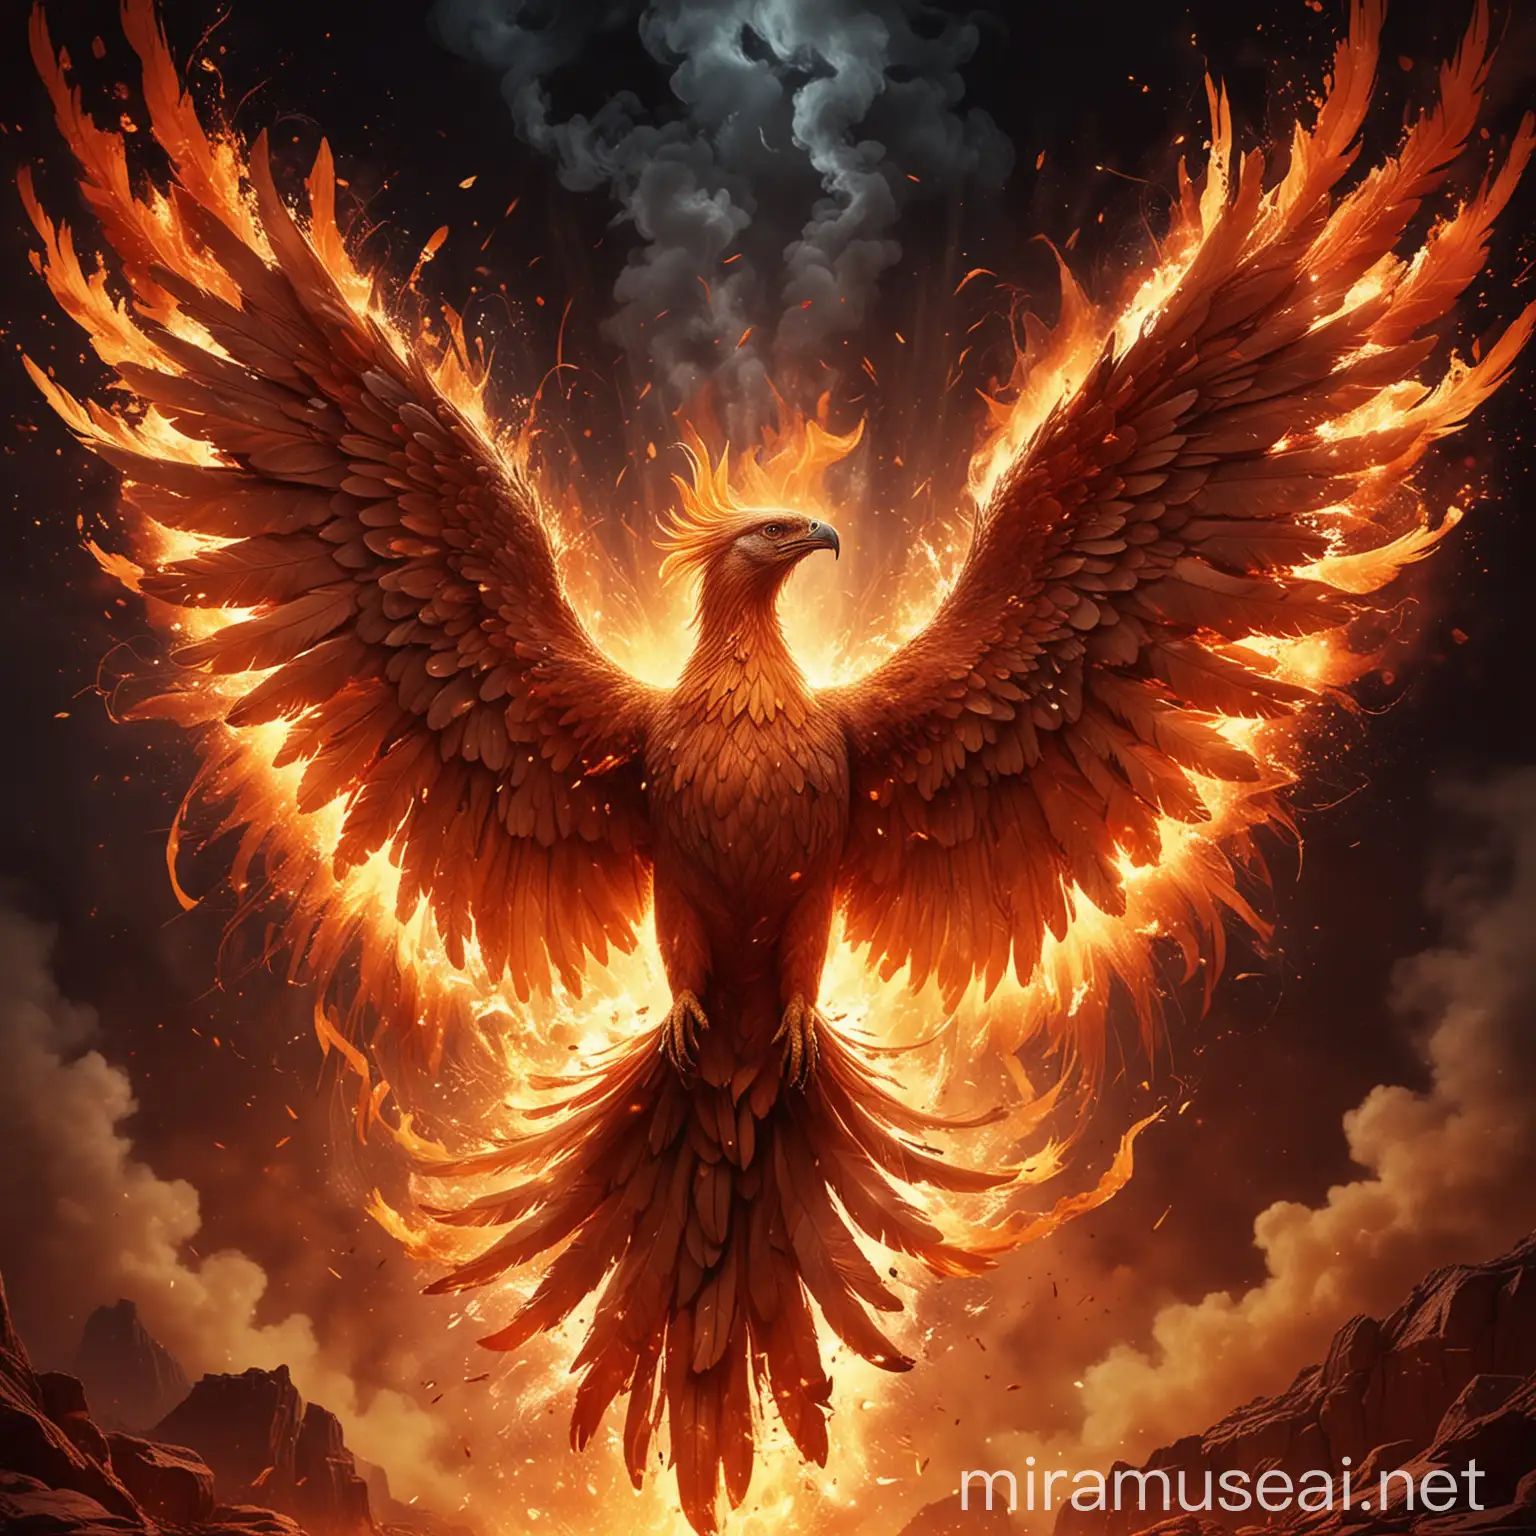 /imagine prompt: A majestic phoenix breaking free from chains, rising from a fiery background. The chains are shattering into glowing fragments, symbolizing freedom from addiction. The phoenix's feathers are vibrant, with colors of red, orange, and gold, depicting the essence of rebirth and transformation. The background shows a transition from darkness to light, emphasizing hope and new beginnings. The eyes of the phoenix are determined and full of life, with a radiant glow. Incorporate elements of smoke and sparks around the phoenix to enhance the dramatic effect. --ar 16:9 --v 5 --q 2 --style vibrant --no text